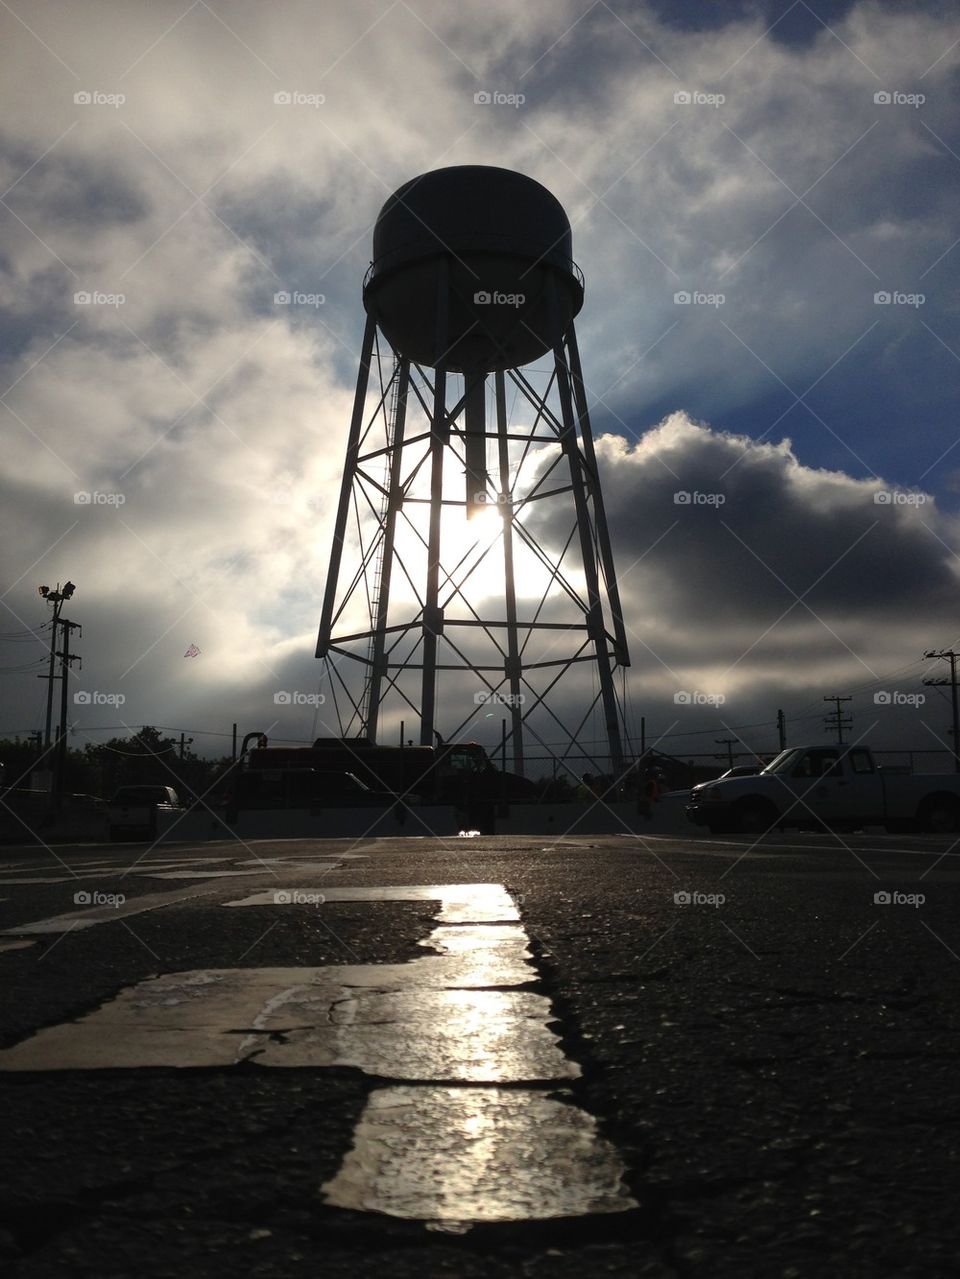 Last day of the water tower eclipse!!